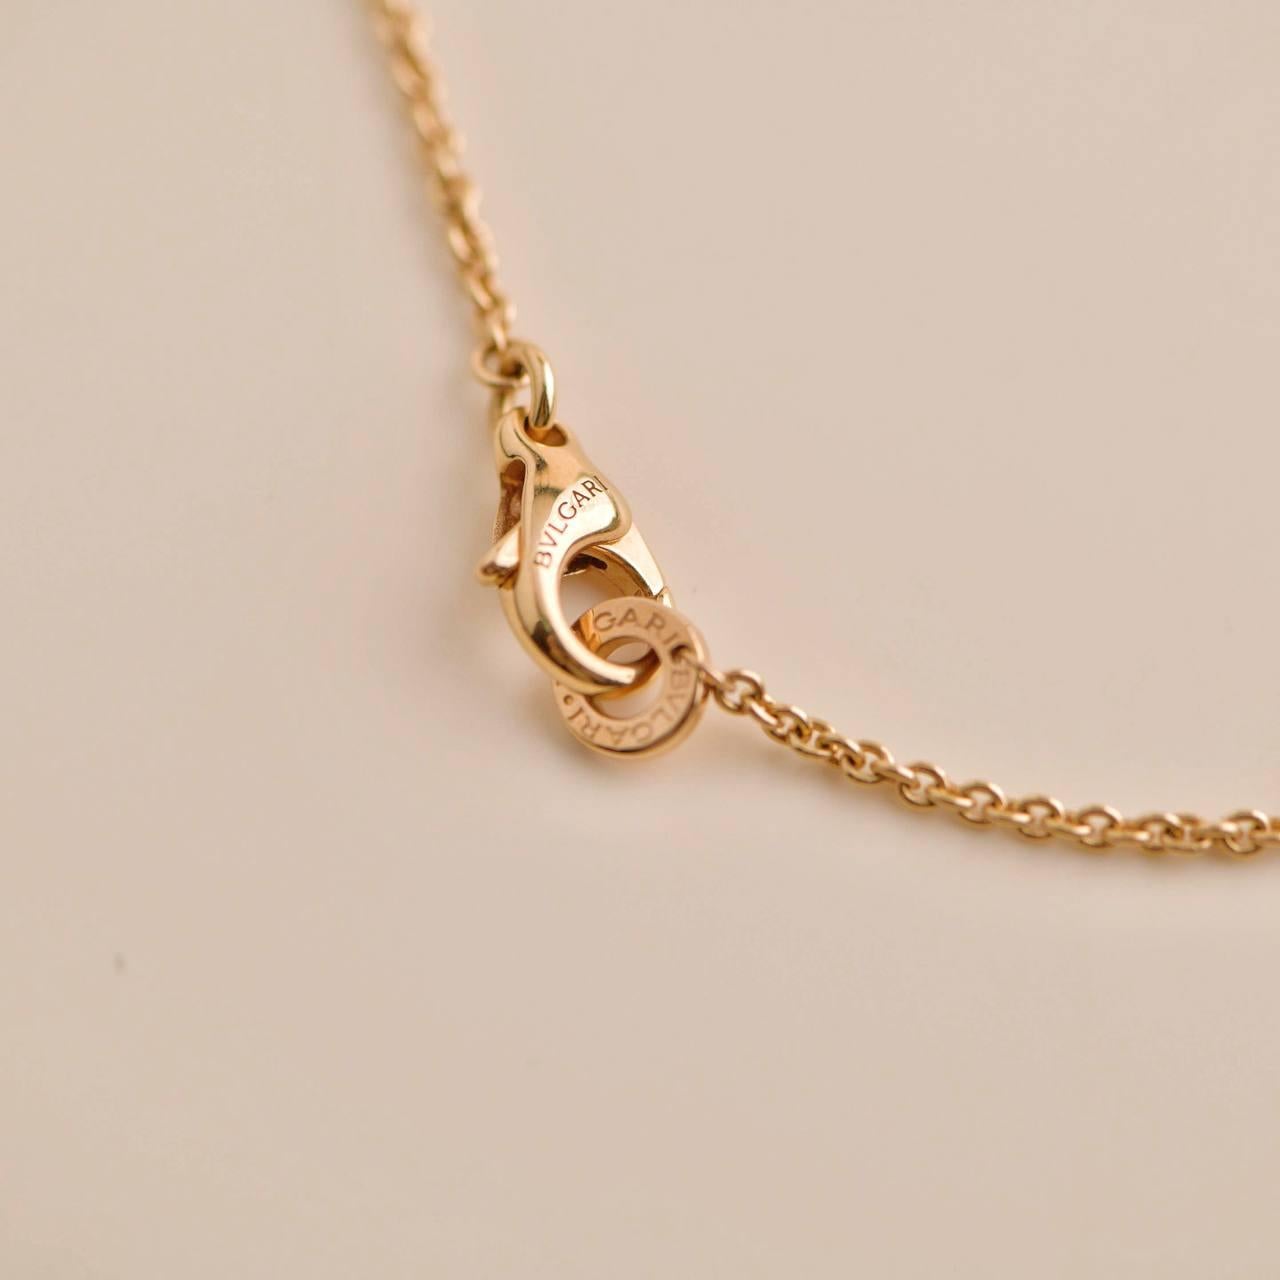 BVLGARI B.ZERO1 Necklace In 18k Yellow Gold For Sale 2